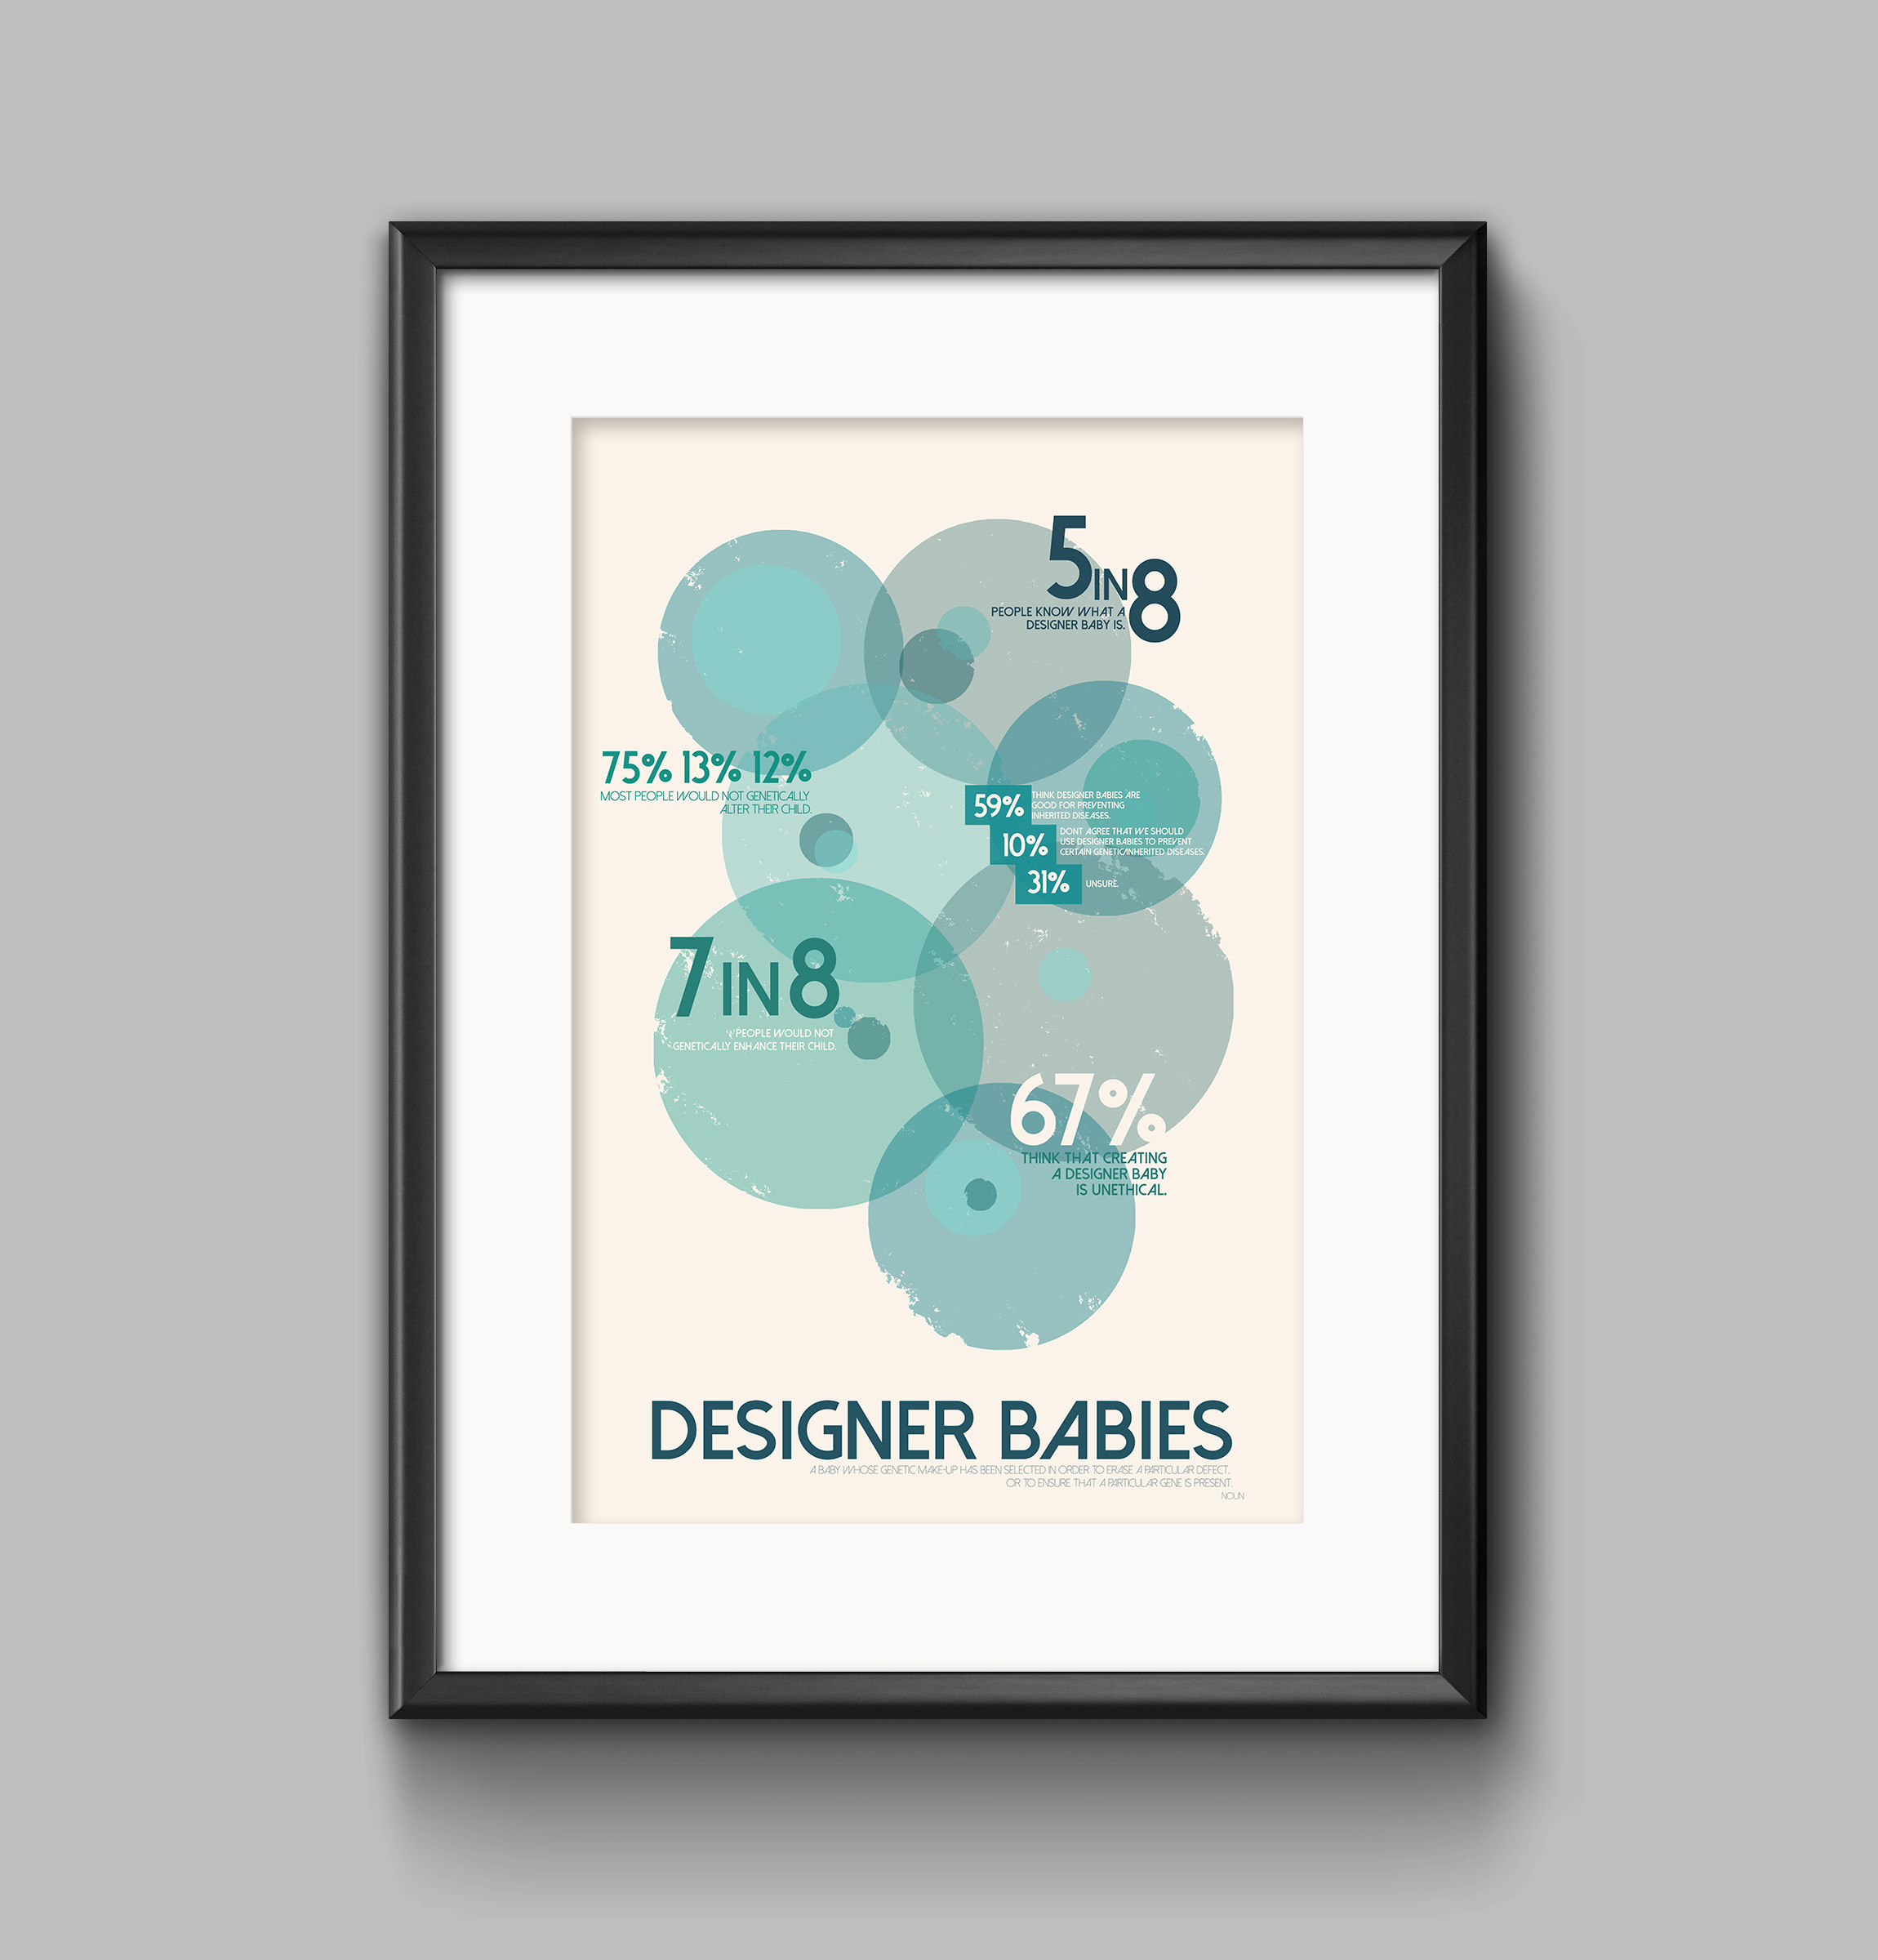 why are designer babies unethical